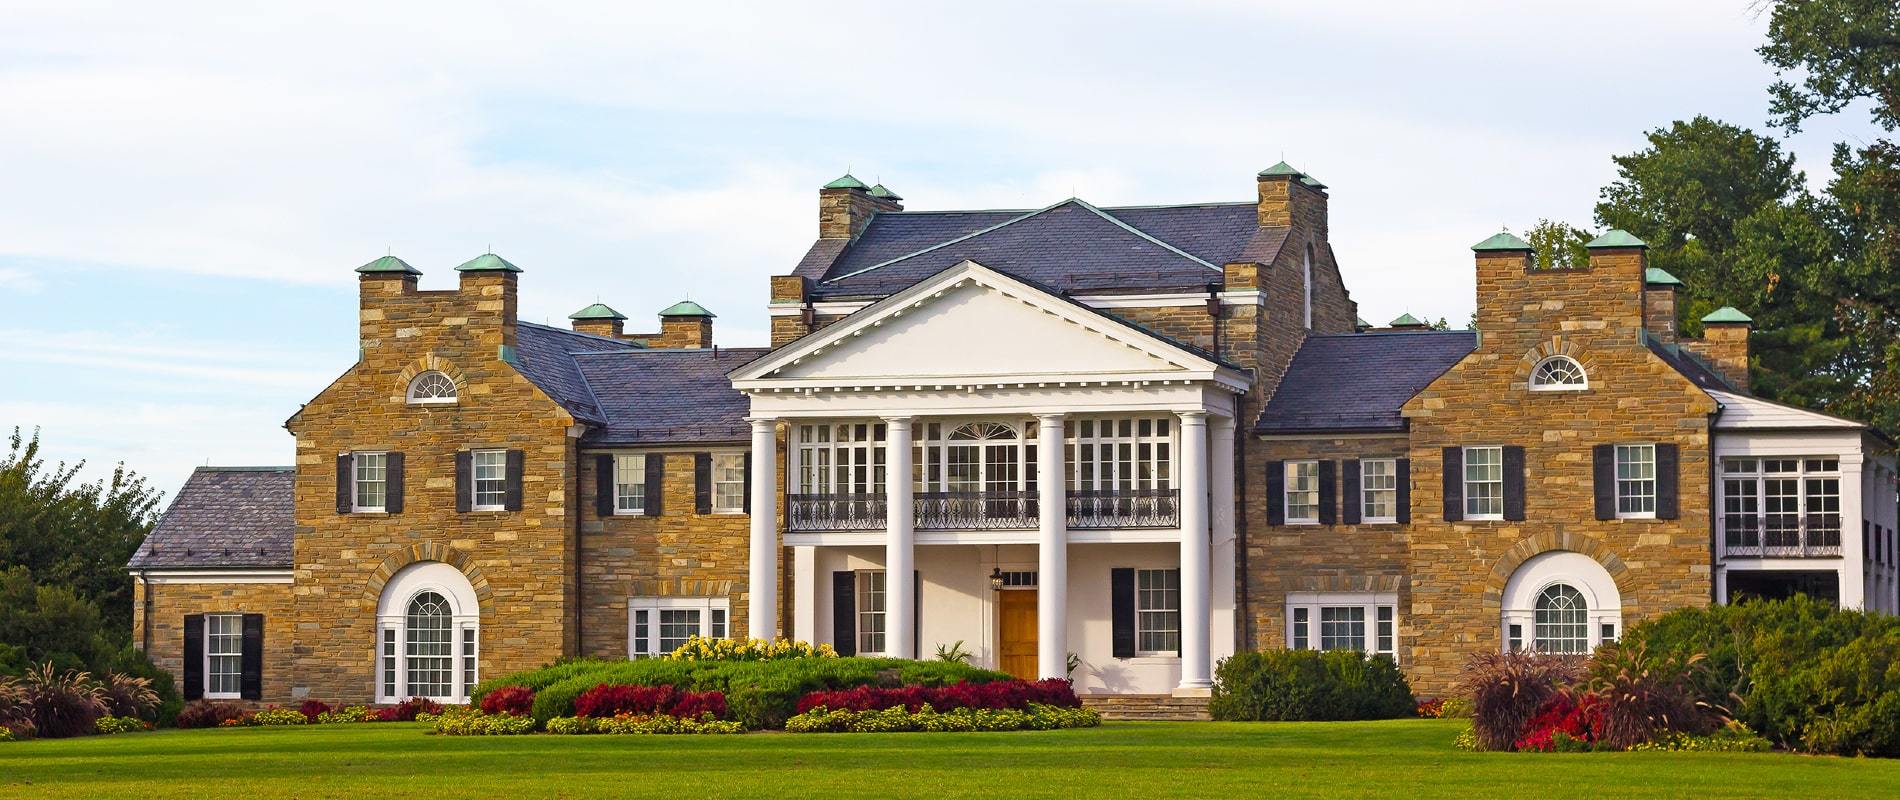 Glenview Mansion located in Rockville, Maryland